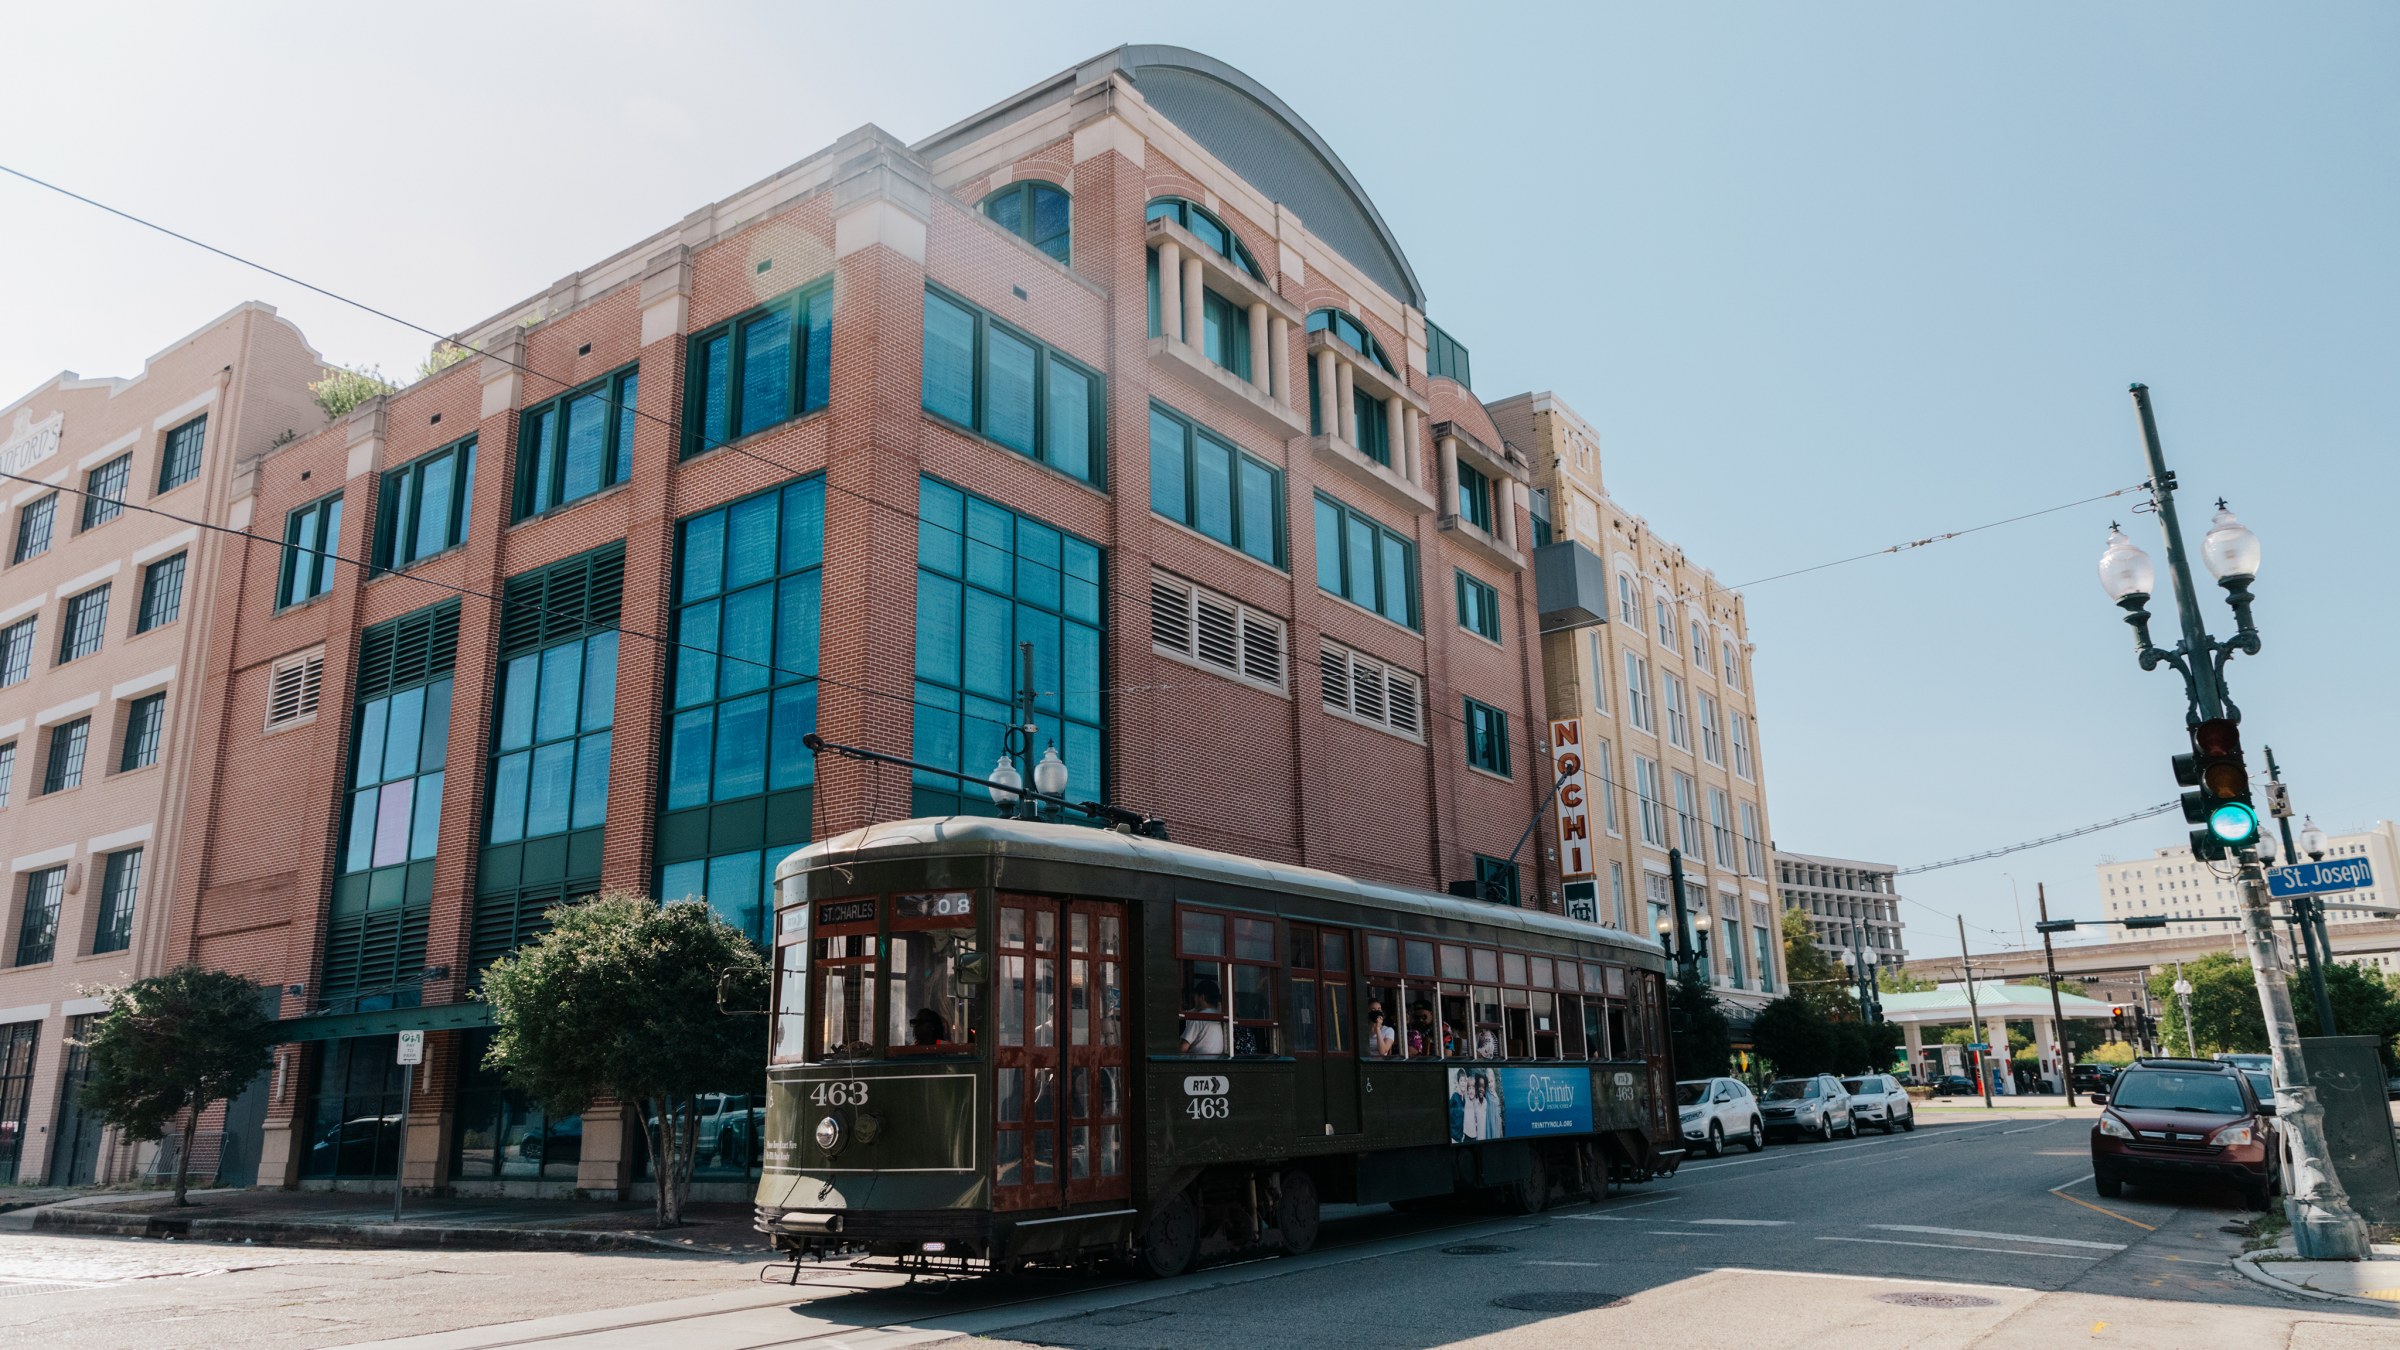 Exterior of five-story building on a corner in a downtown setting with a streetcar passing in the foreground